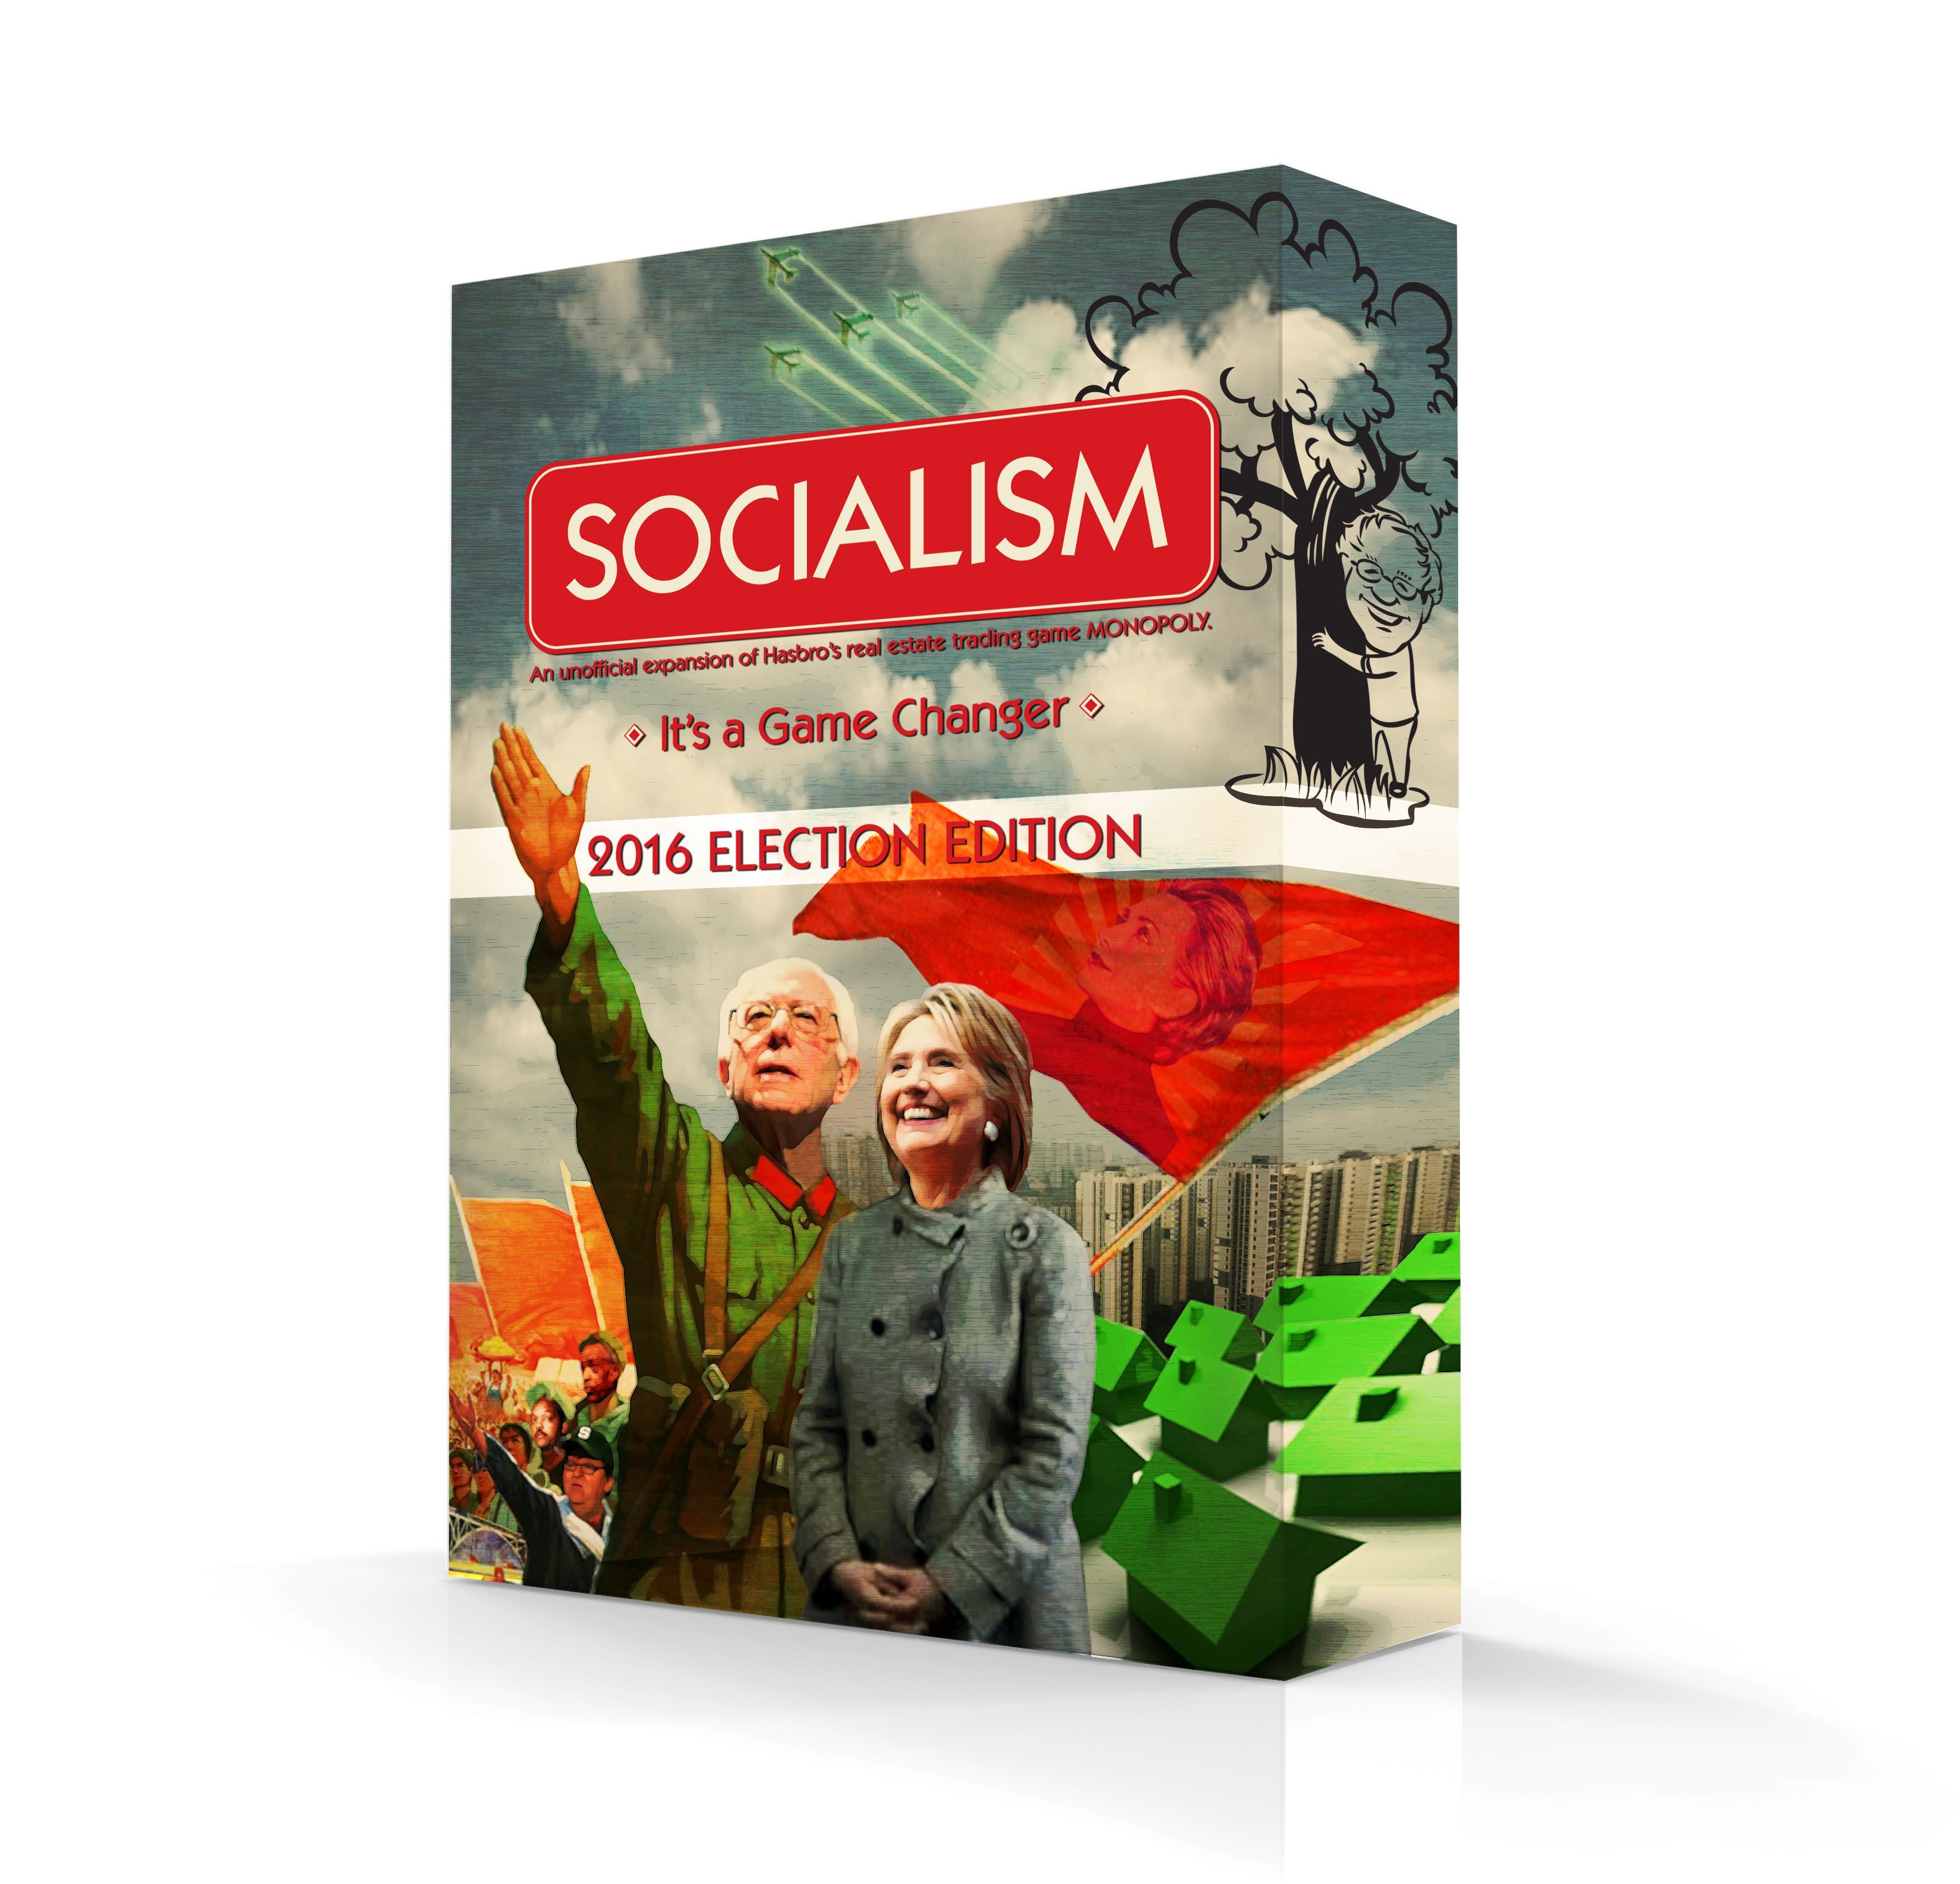 SOCIALISM: The Game